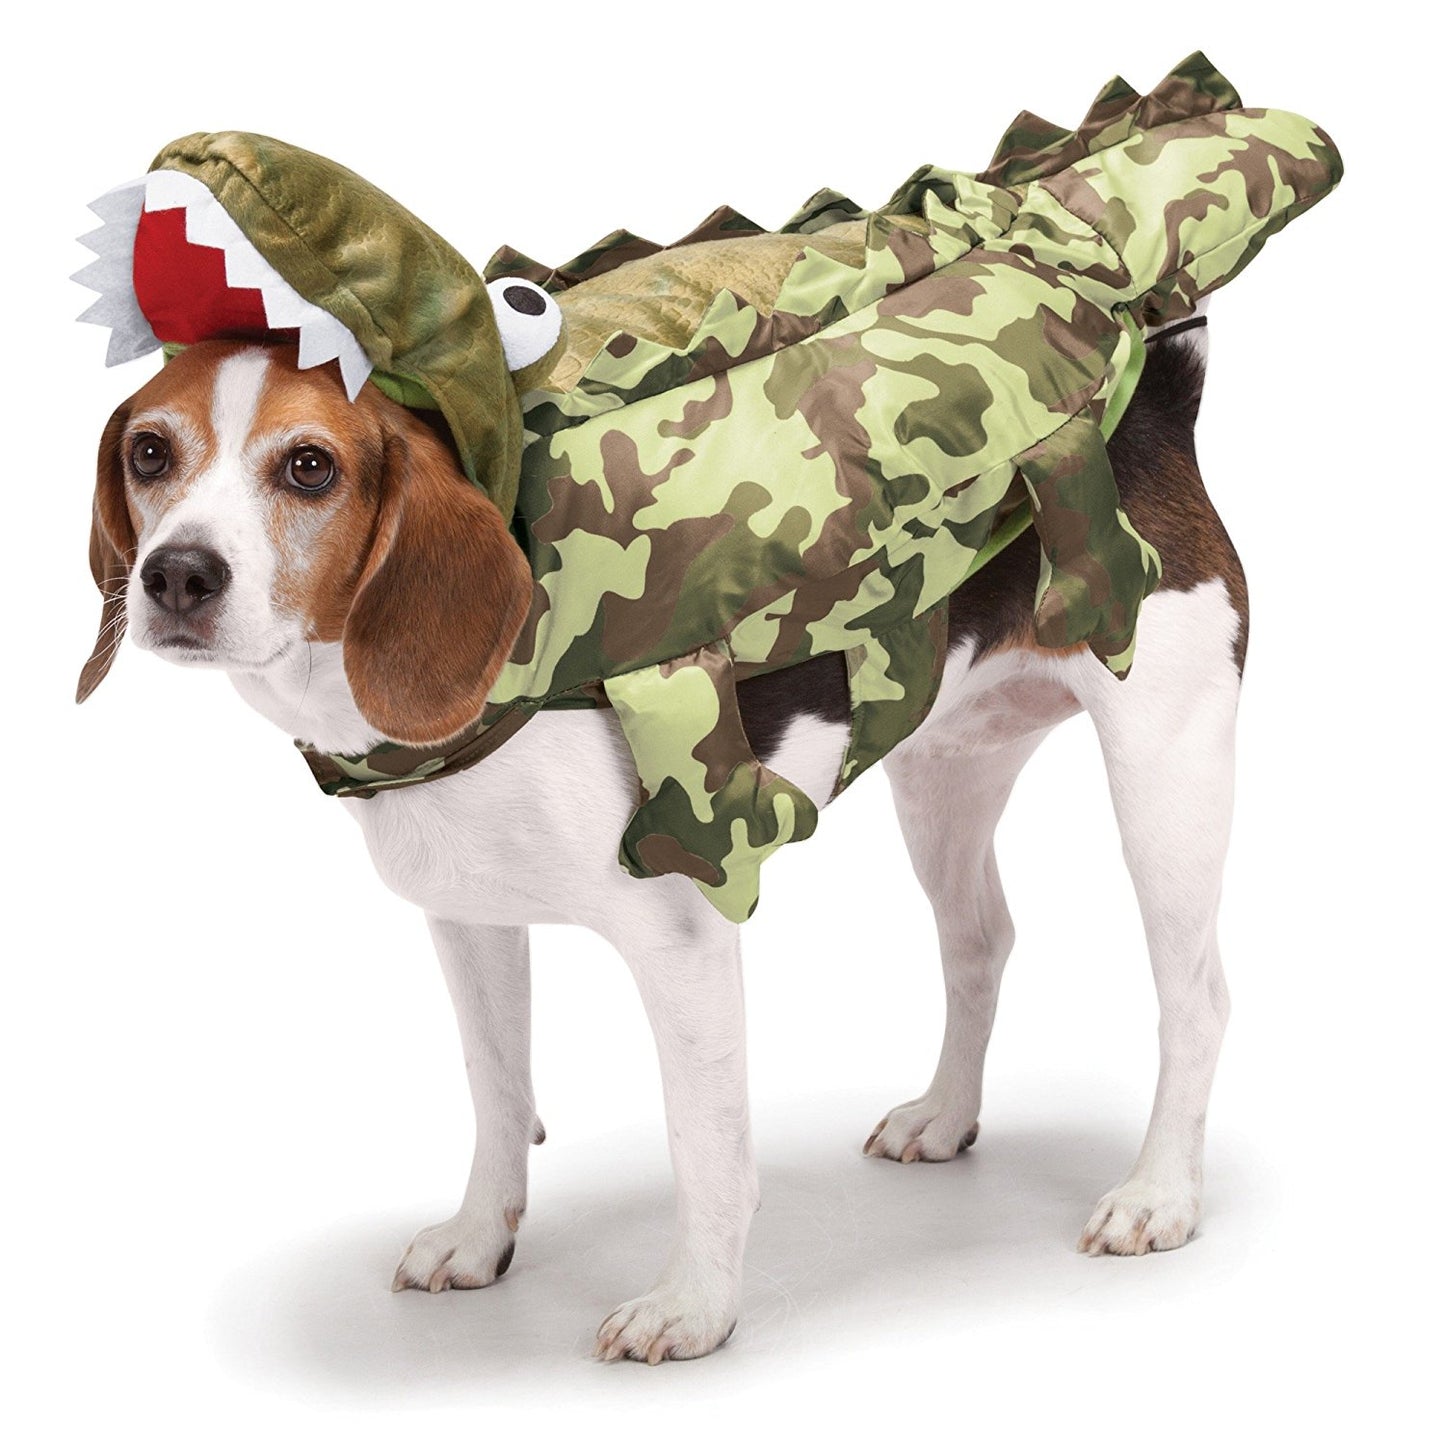 Zack & Zoey Camo Alligator Costume for Dogs, X-Large